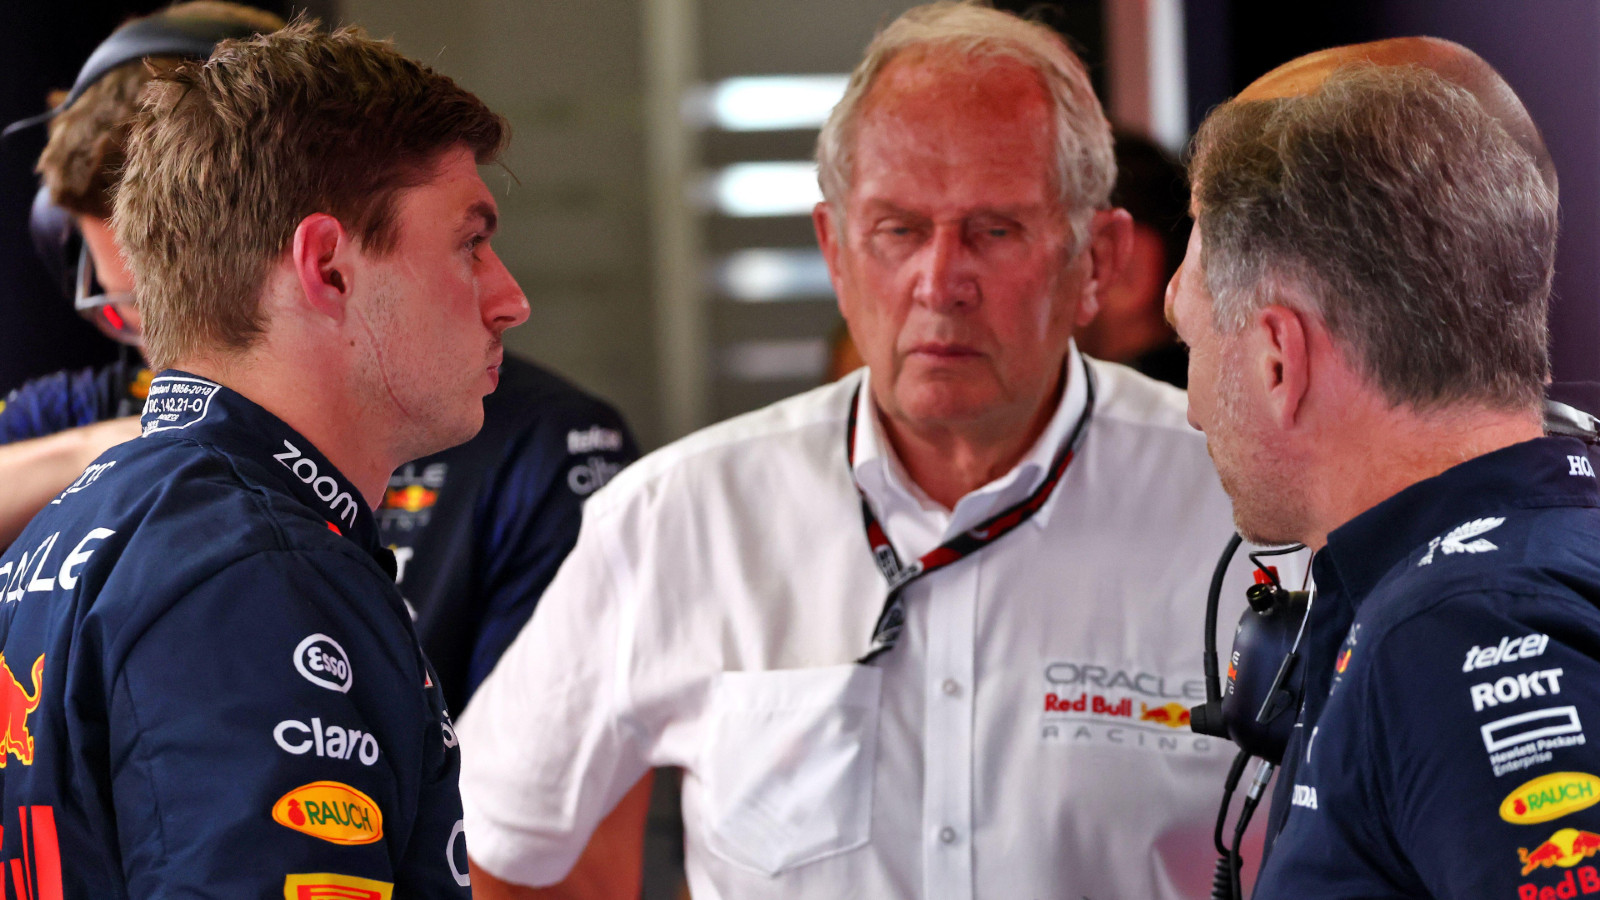 Christian Horner reveals F1 and FIA contact with Red Bull over Helmut Marko  : PlanetF1